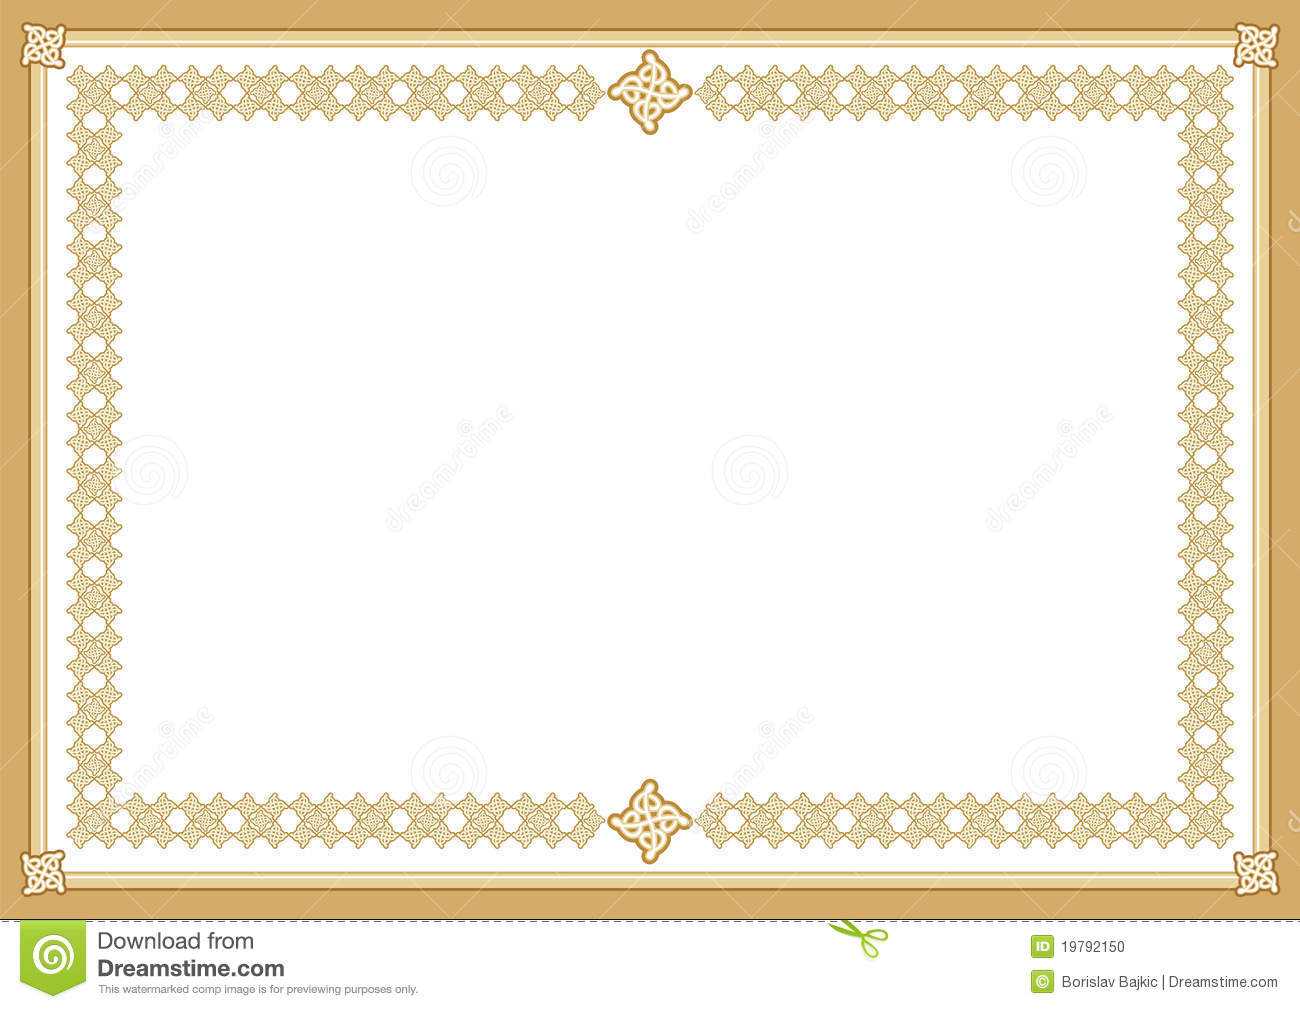 Certificate Stock Vector. Illustration Of Award, Blank Throughout Award Certificate Border Template